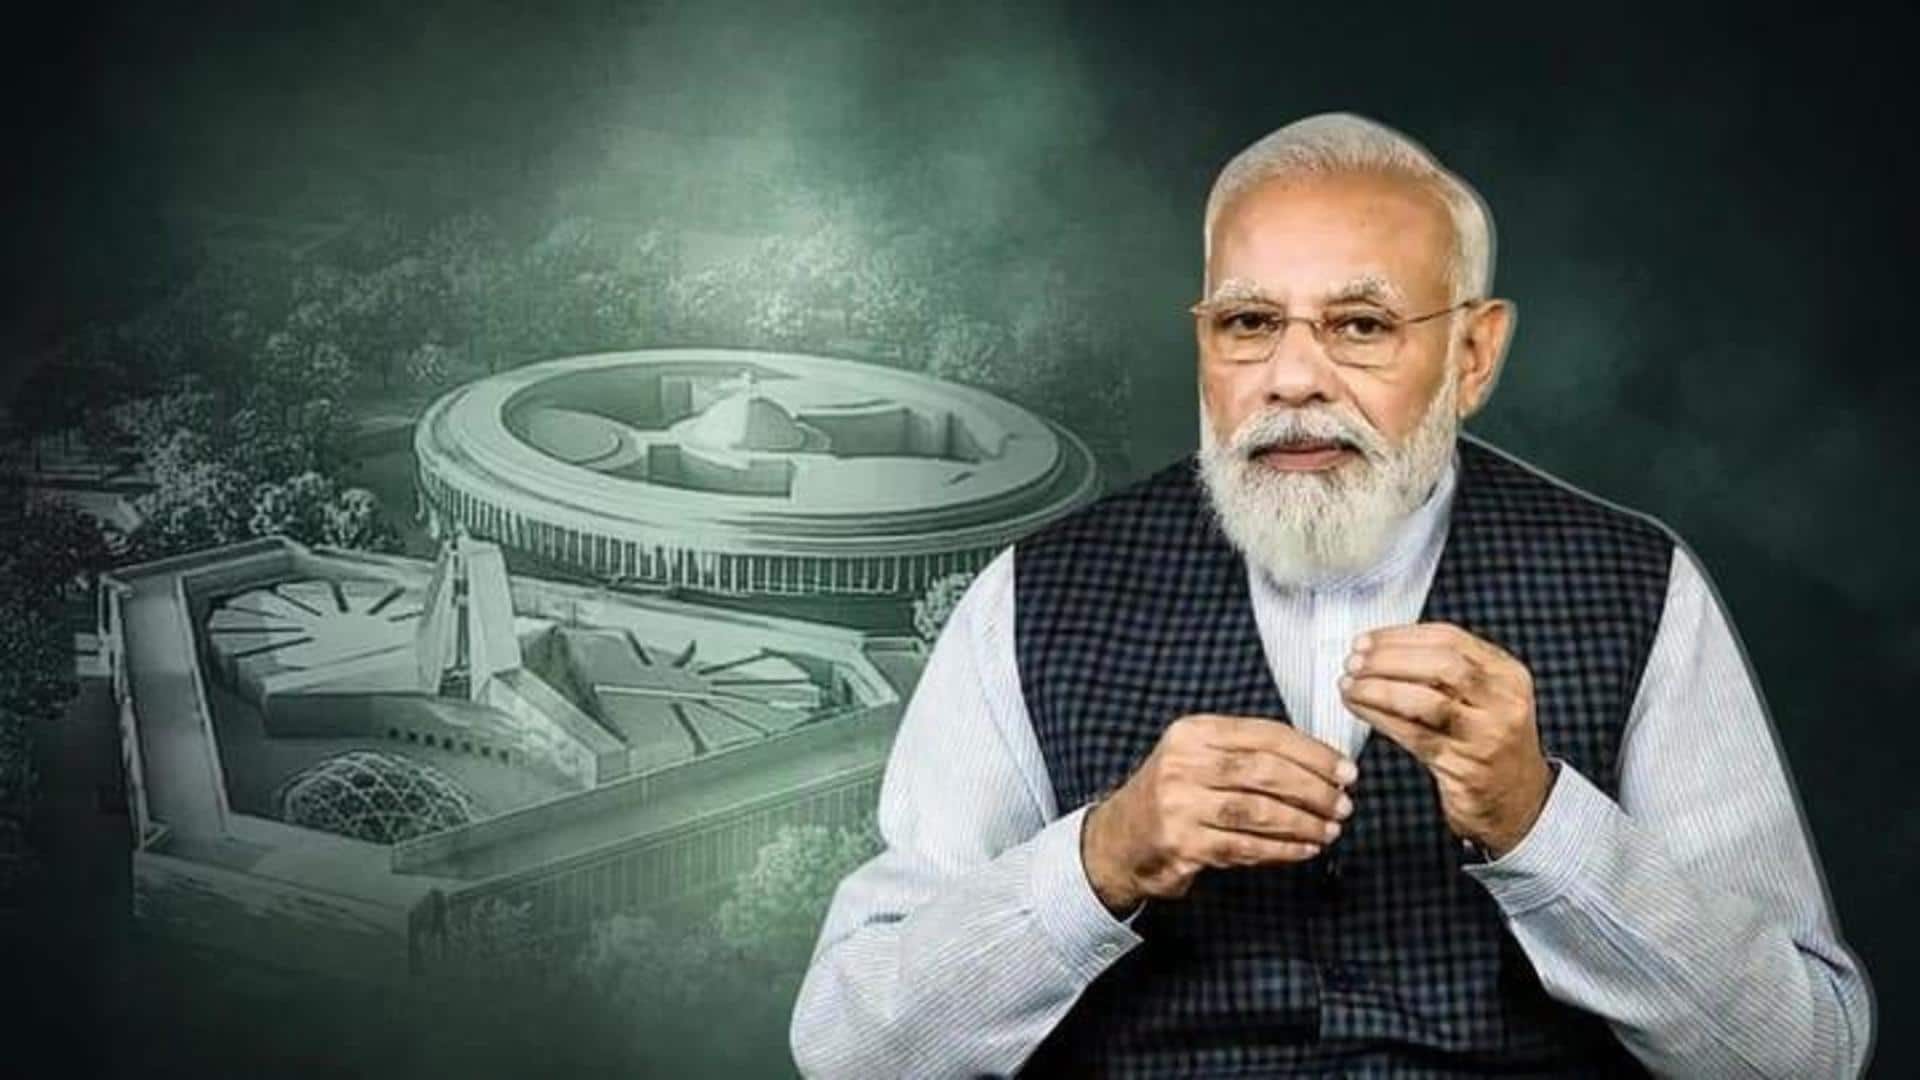 PM Modi to inaugurate new Parliament in May end: Report